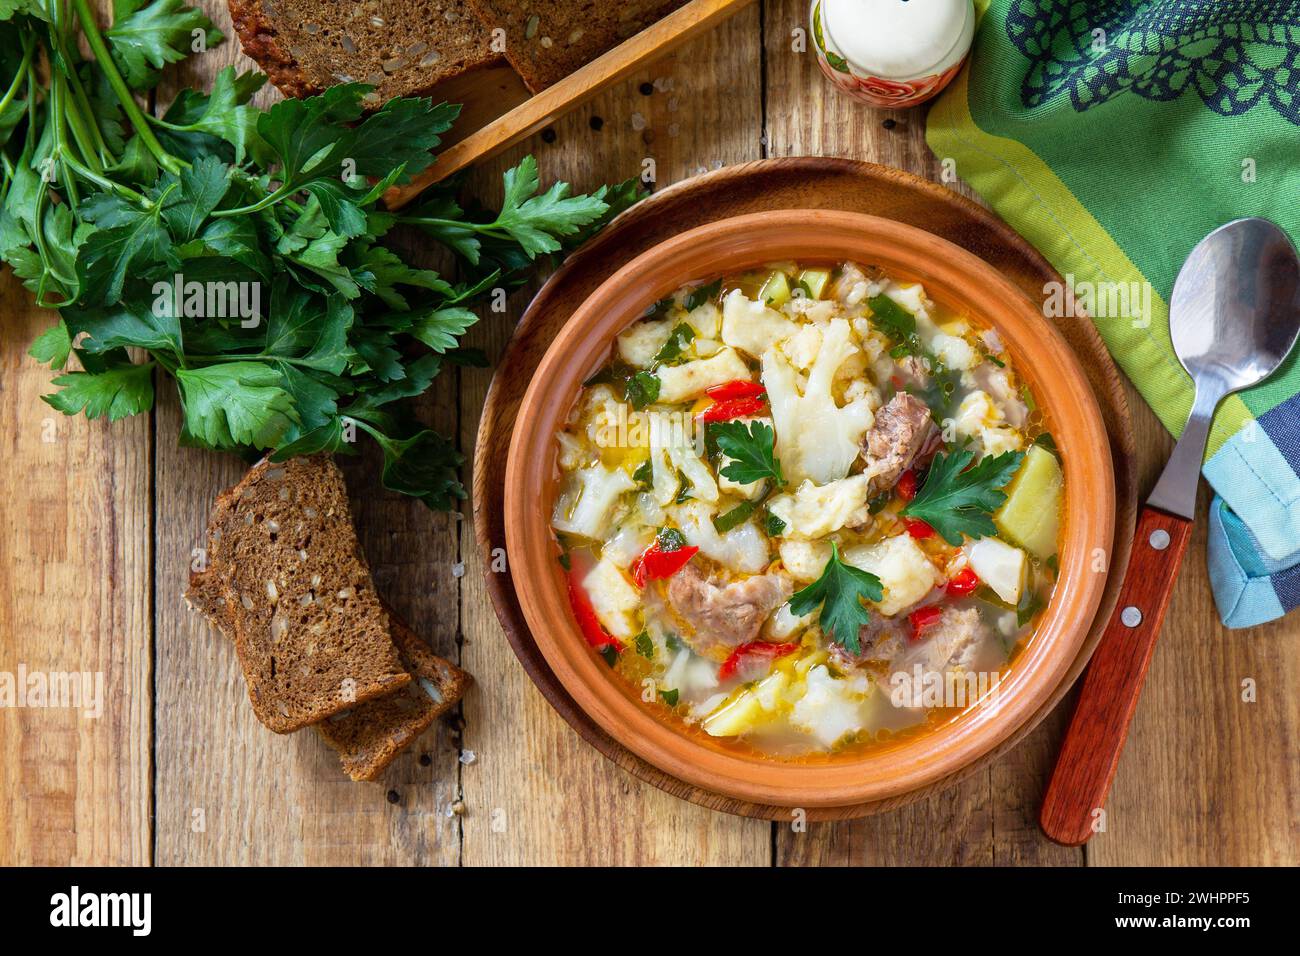 Traditional Hungarian thick soup with beef, vegetables and dumplings on a wooden table. Hot dinner or lunch. Flat lay, top view. Stock Photo